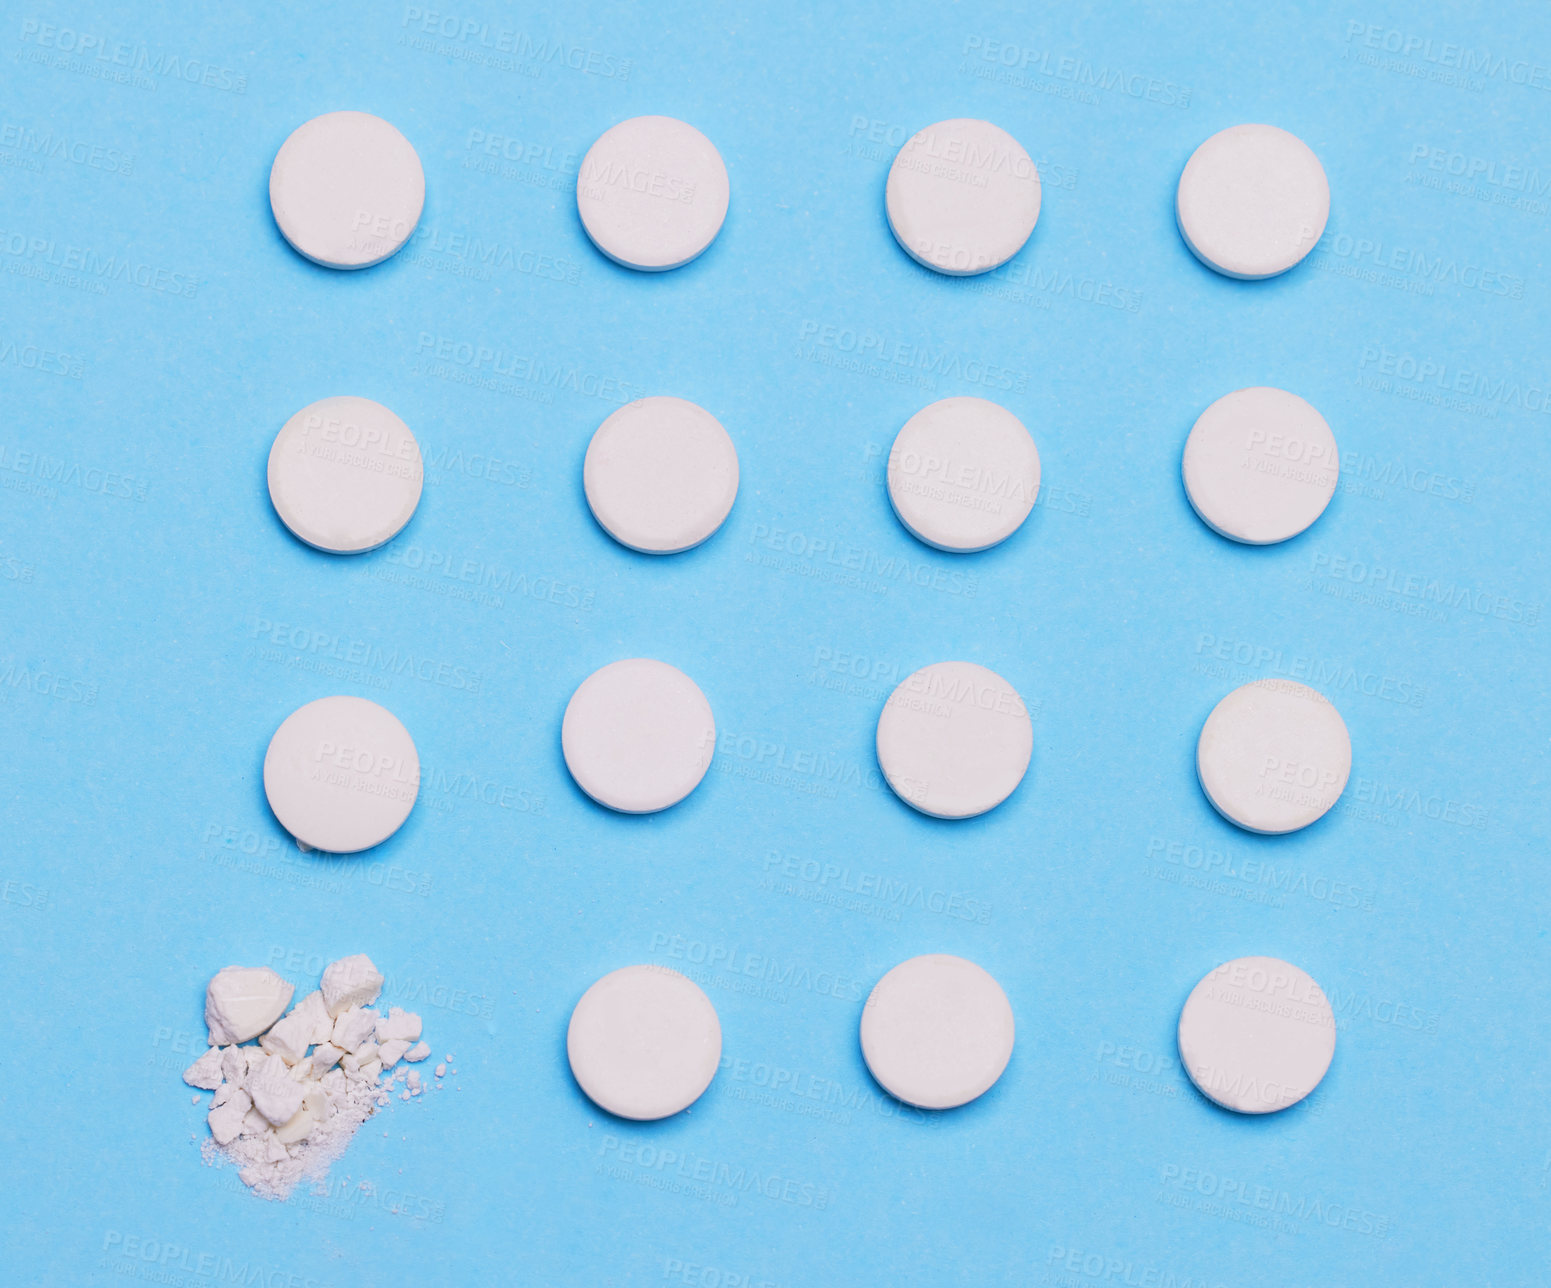 Buy stock photo Studio shot of pills against a blue background